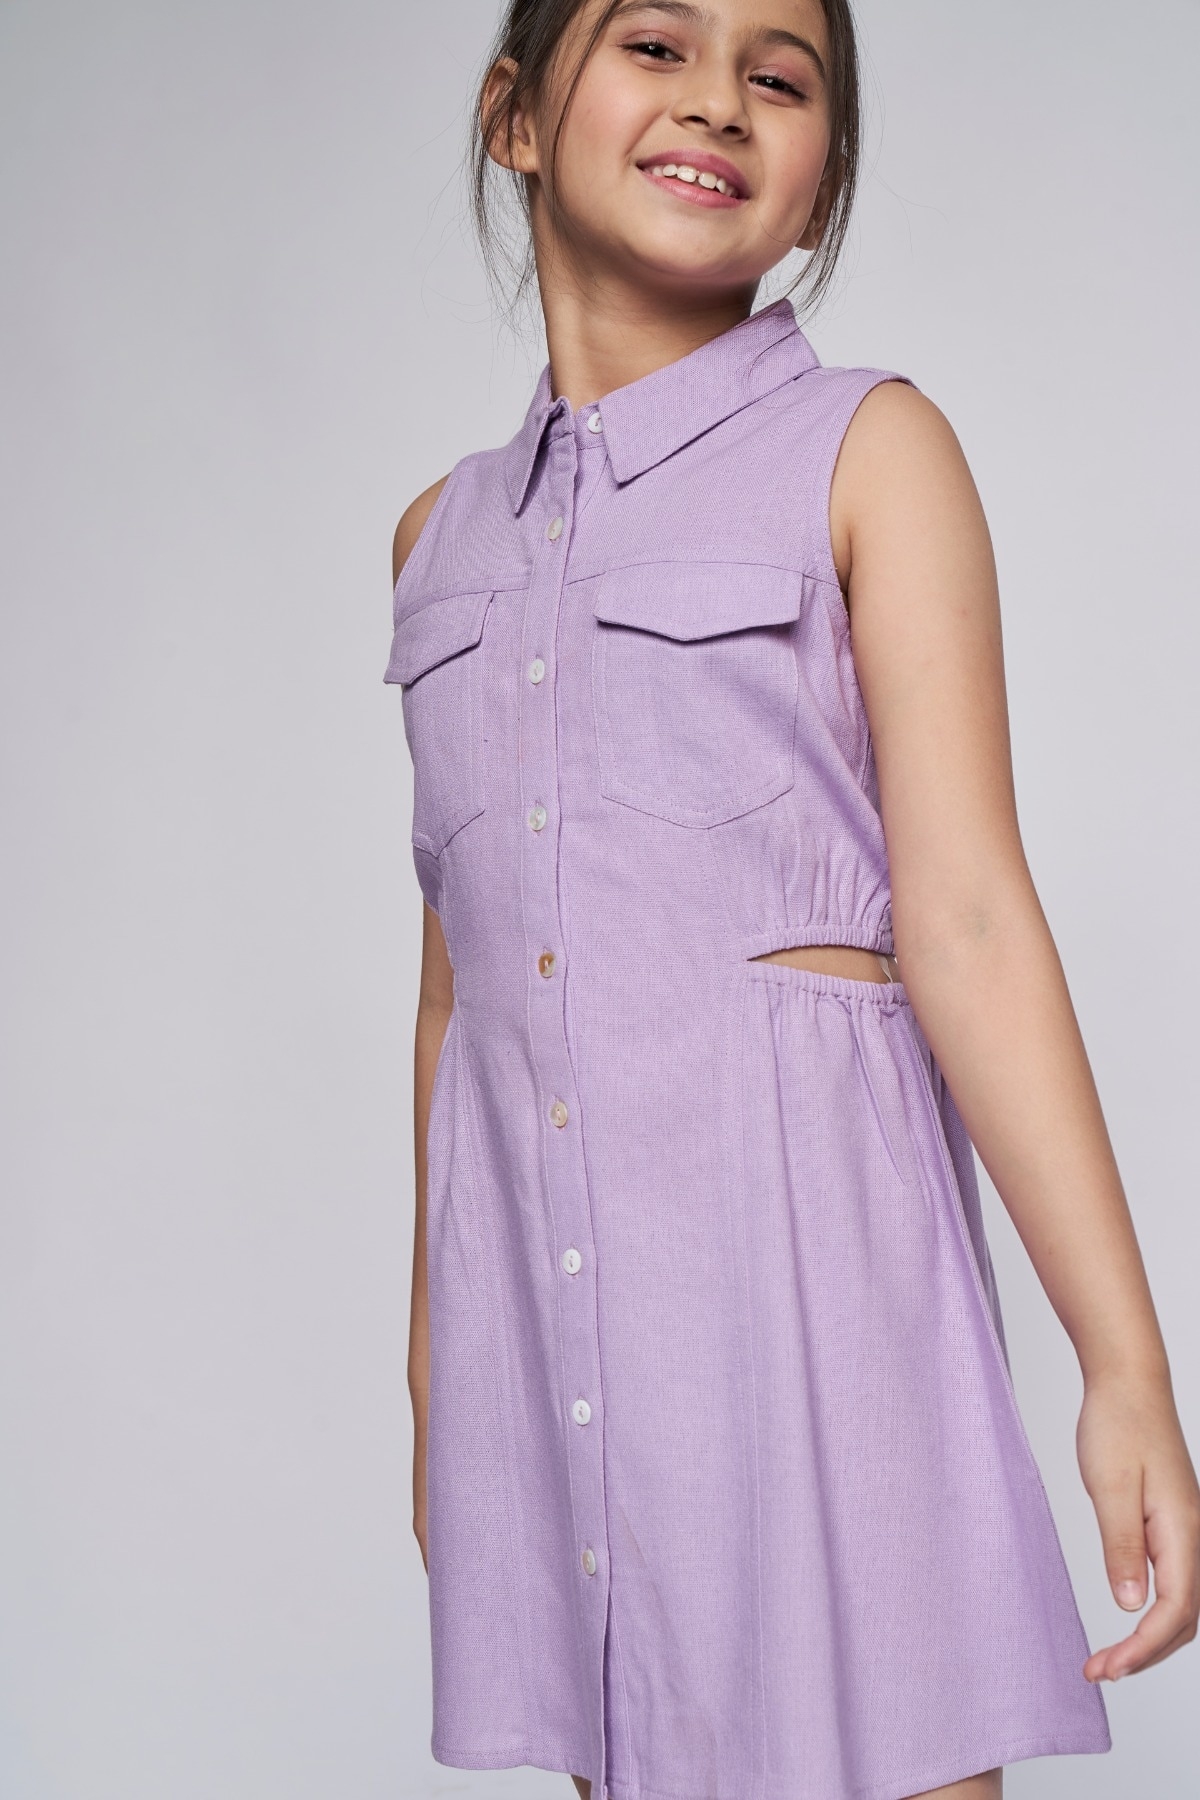 AND Lilac Dress